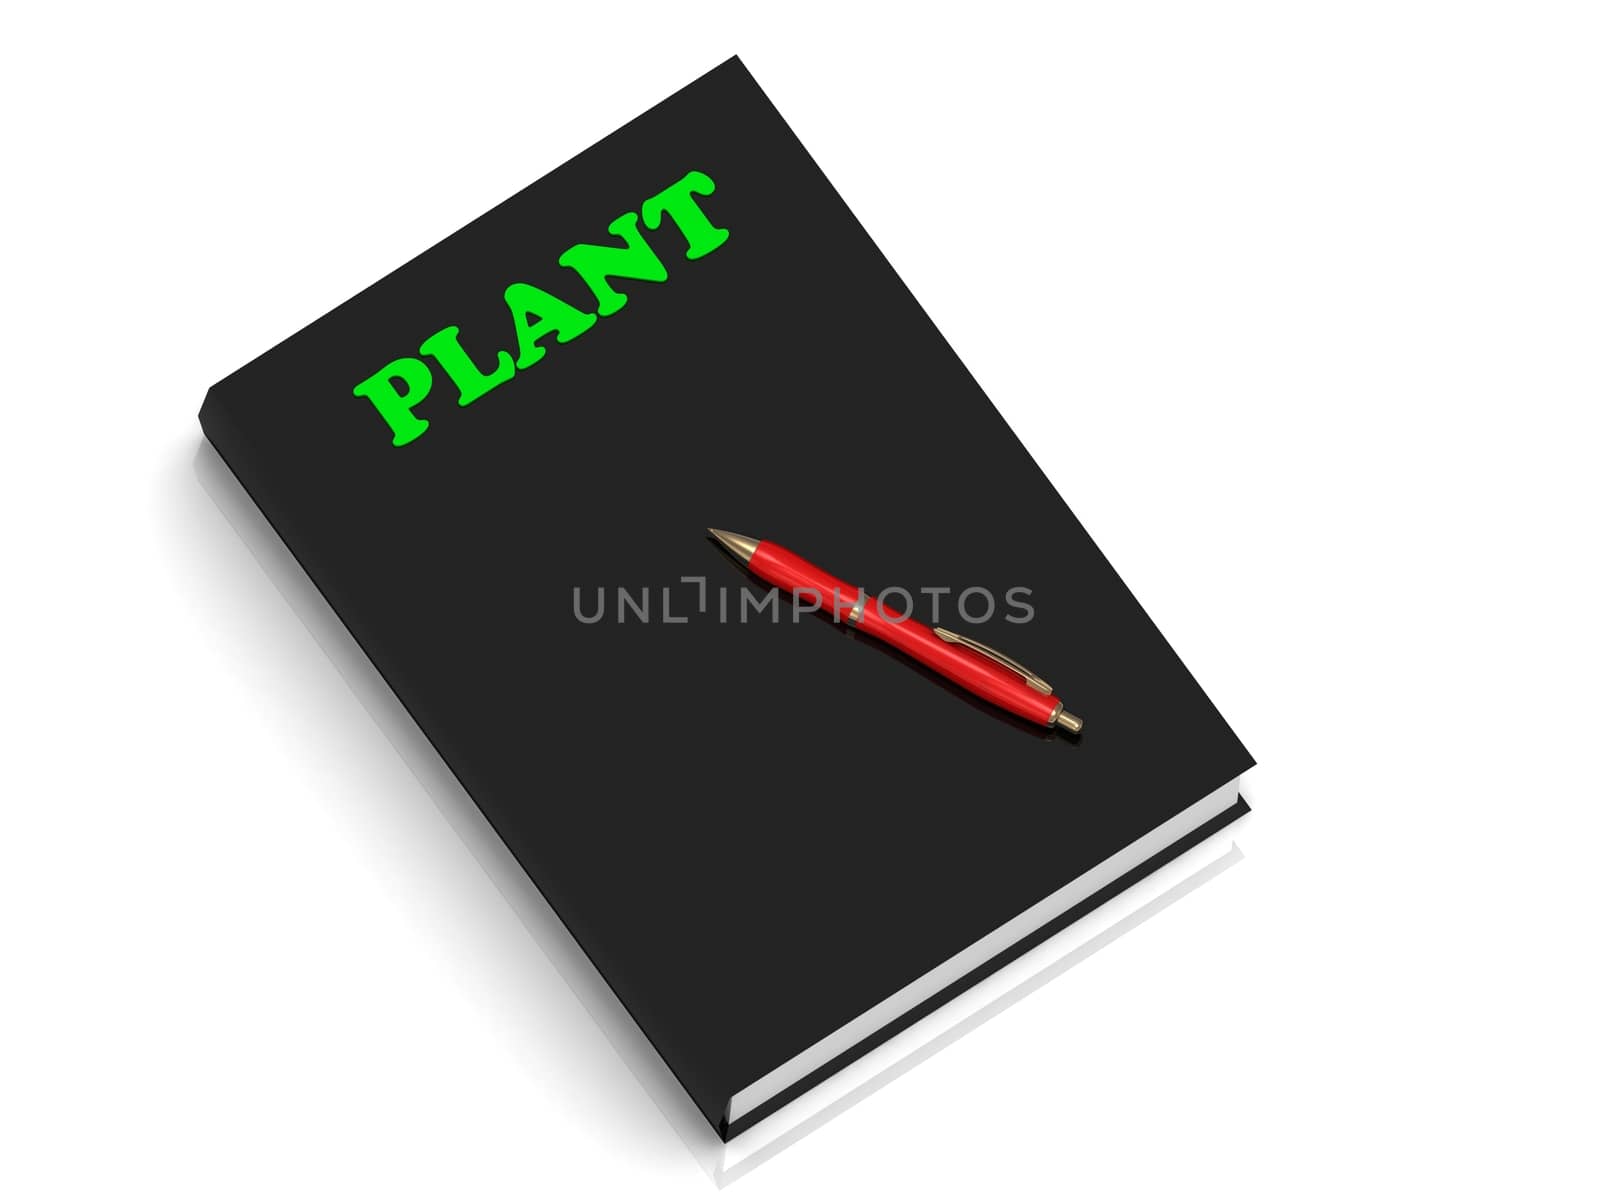 PLANT- inscription of green letters on black book on white background